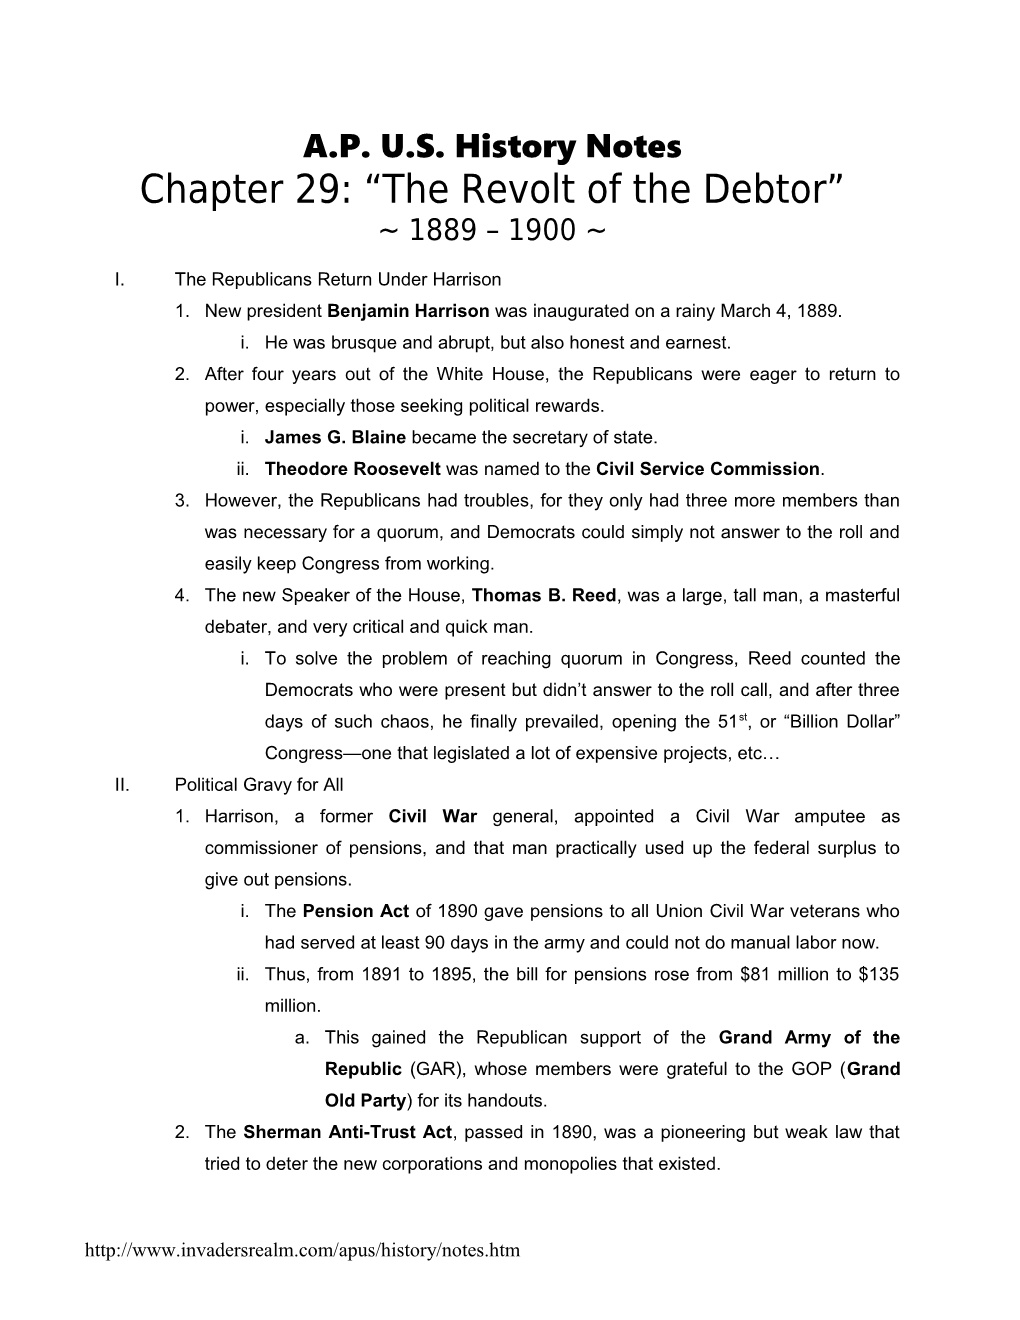 Chapter 29: the Revolt of the Debtor